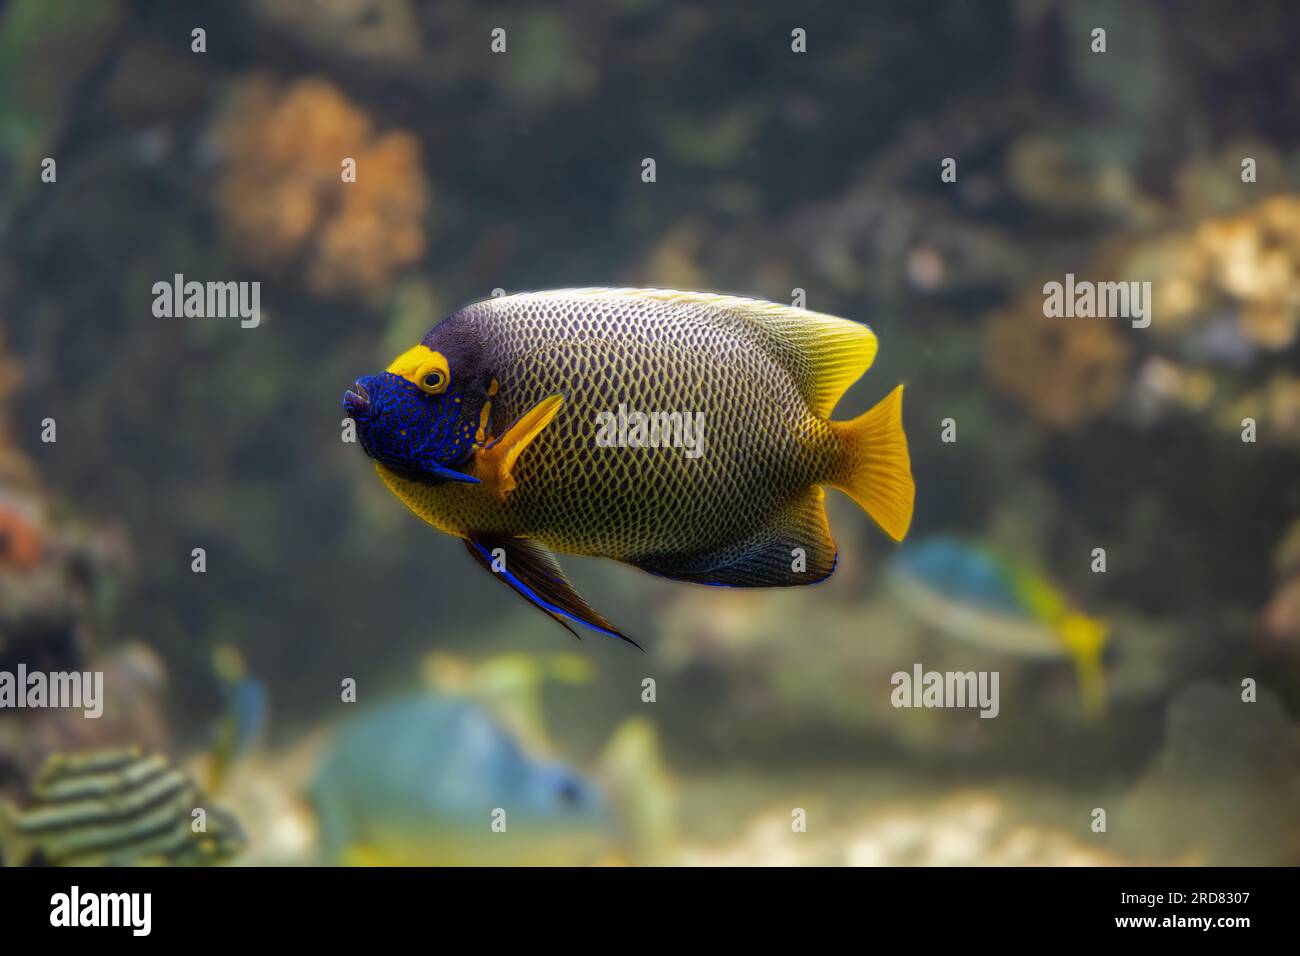 Blue faced angelfish Pomacanthus xanthometopon in a coral reef. Stock Photo